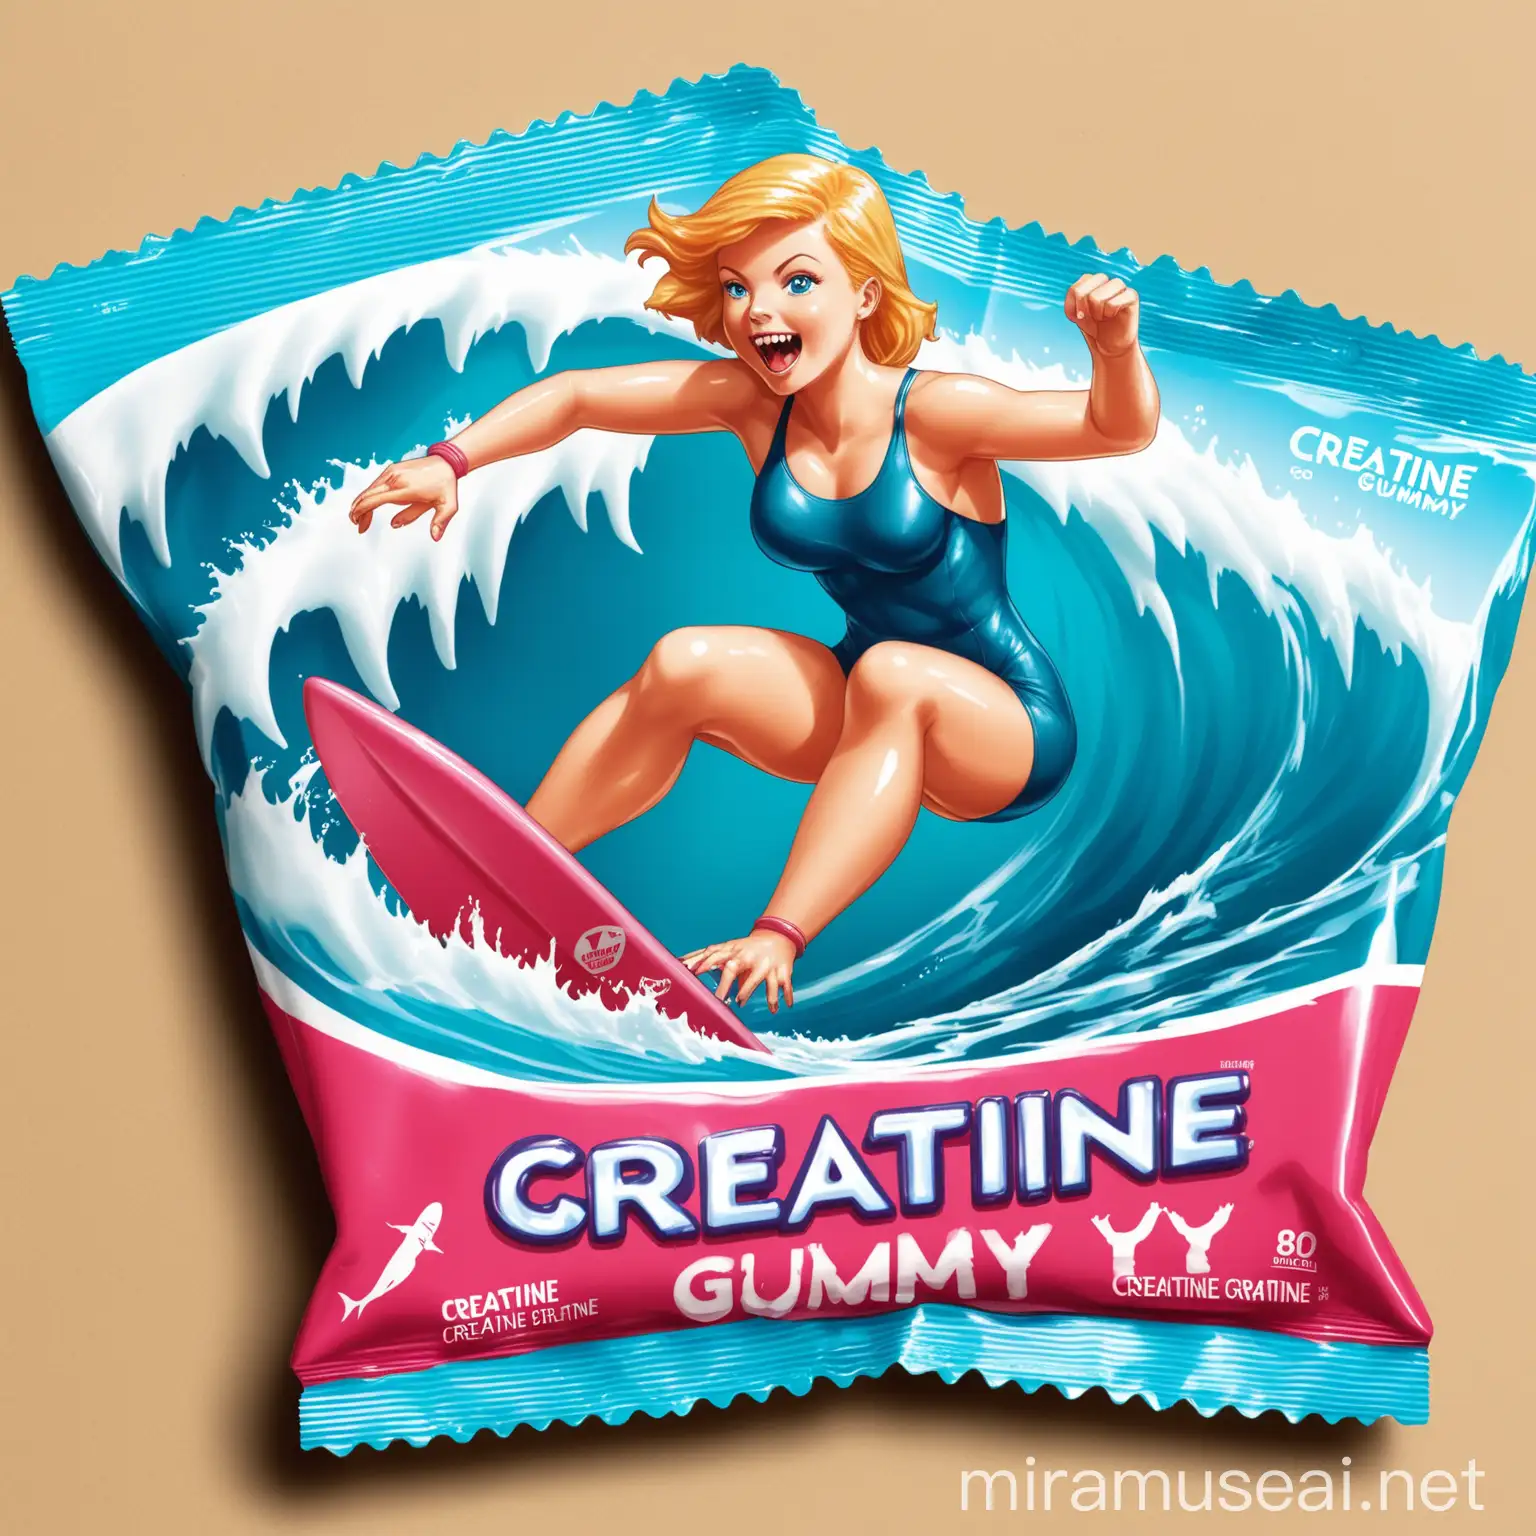 packaging for a creatine gummy showing a woman surfing on a shark